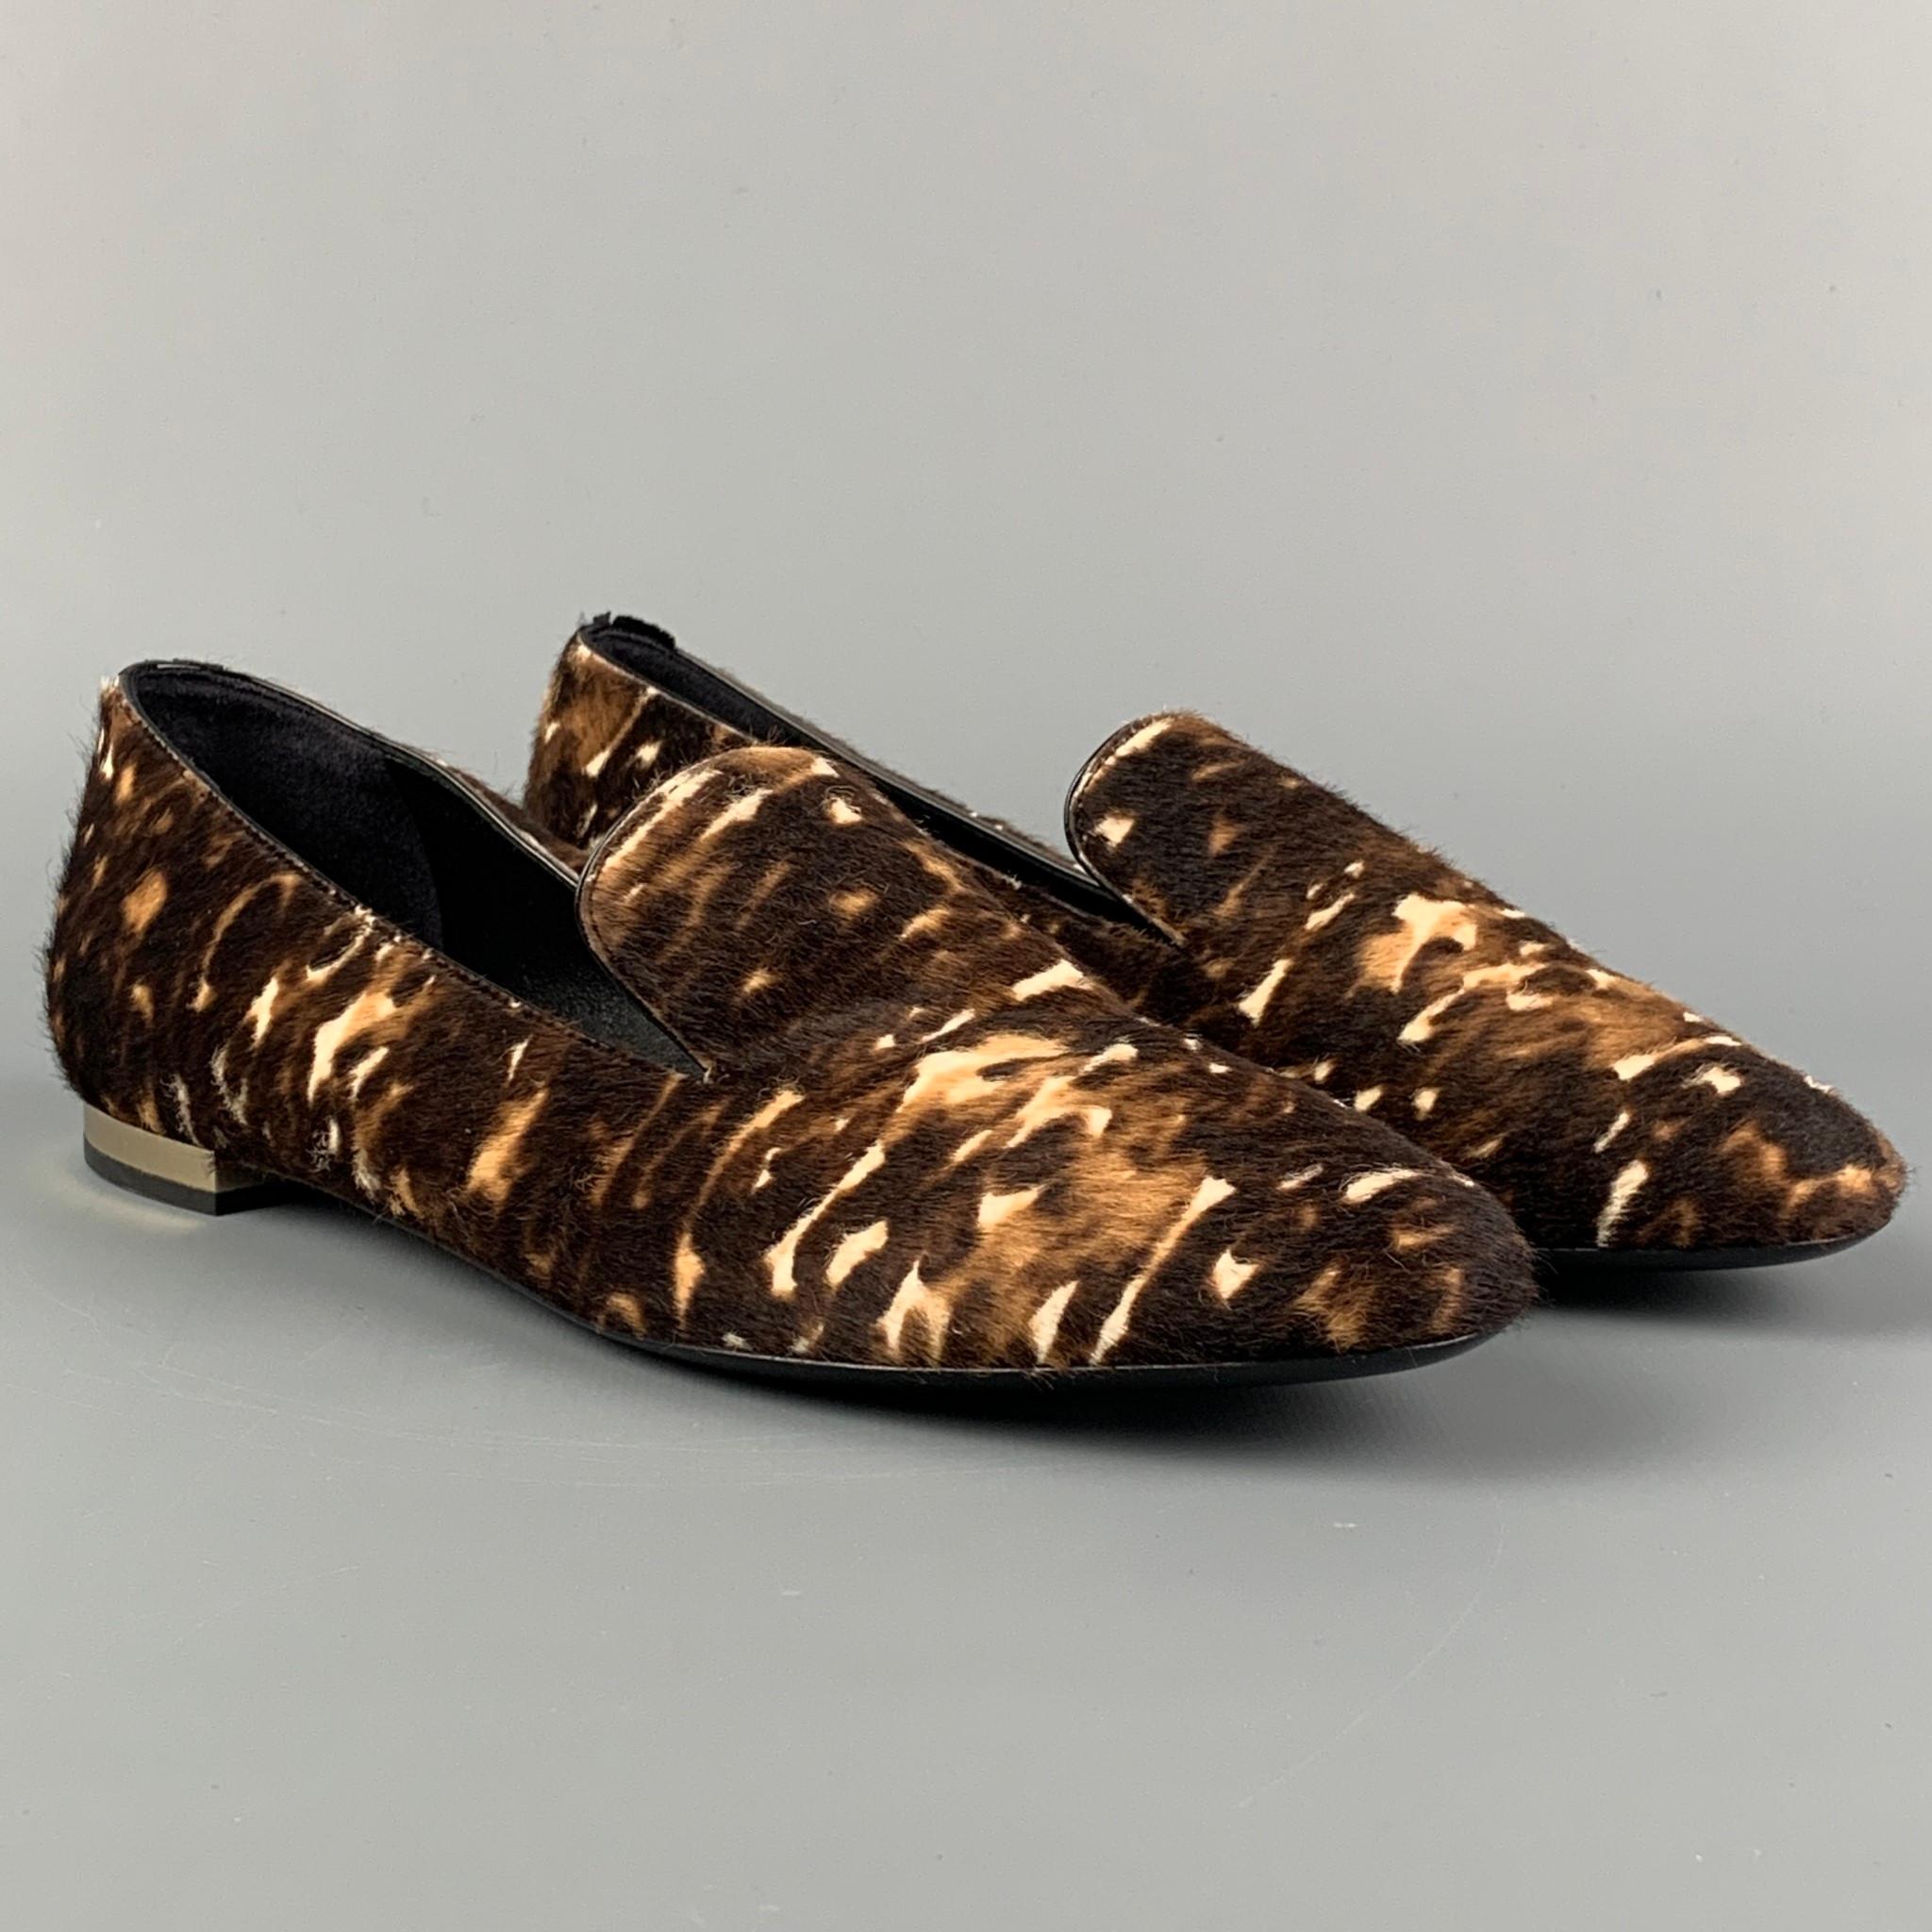 BURBERRY PRORSUM flats comes ni a brown animal print pony hair featuring a gold tone trim and a slip on style. Made in Italy. 

Very Good Pre-Owned Condition.
Marked: 35 C

Outsole: 9.5 in. x 3 in. 